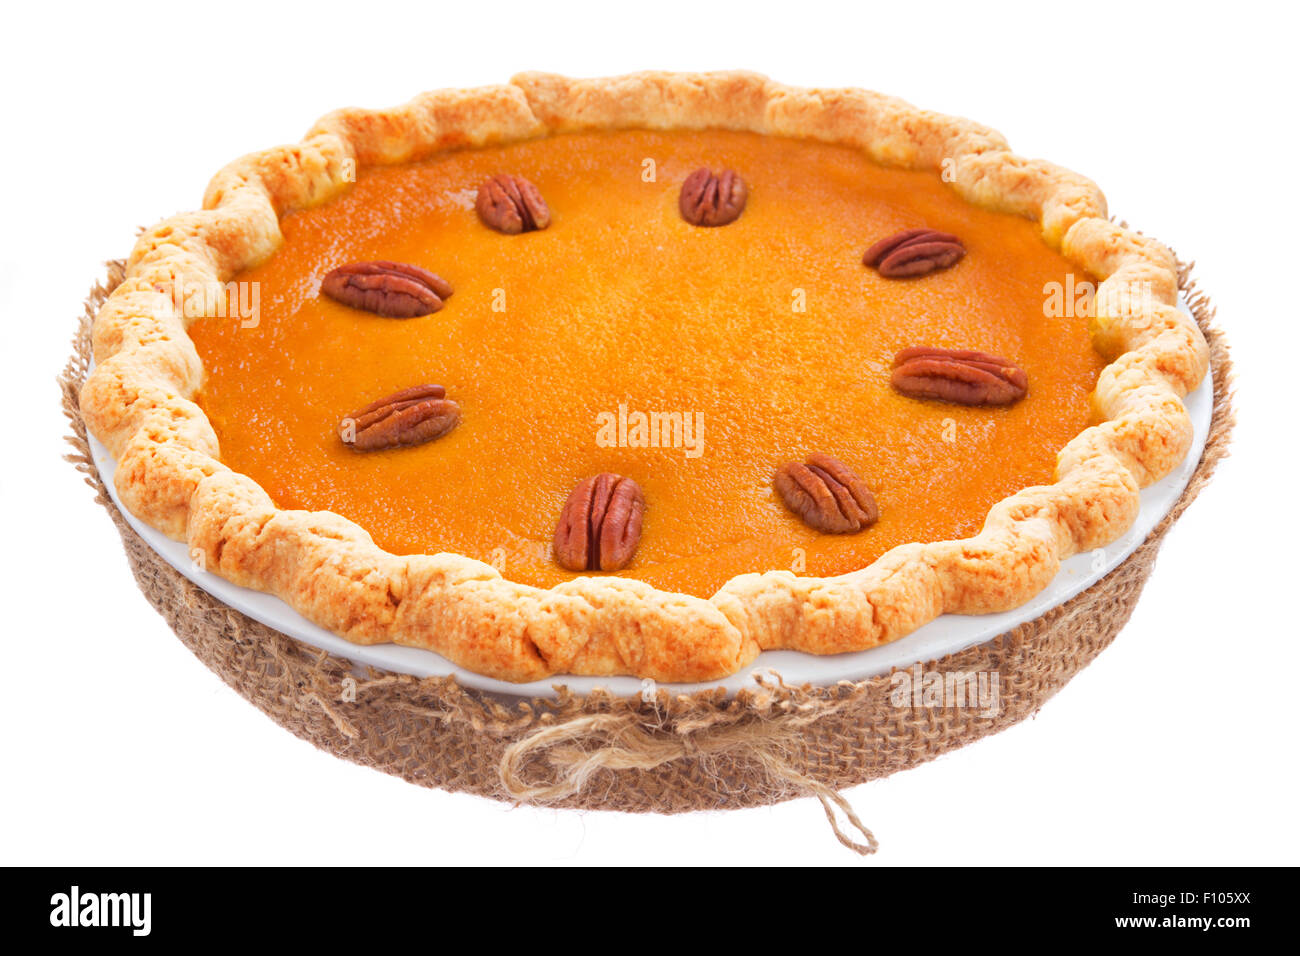 A delicious rustic homemade pumpkin pie isolated on a white background. Stock Photo